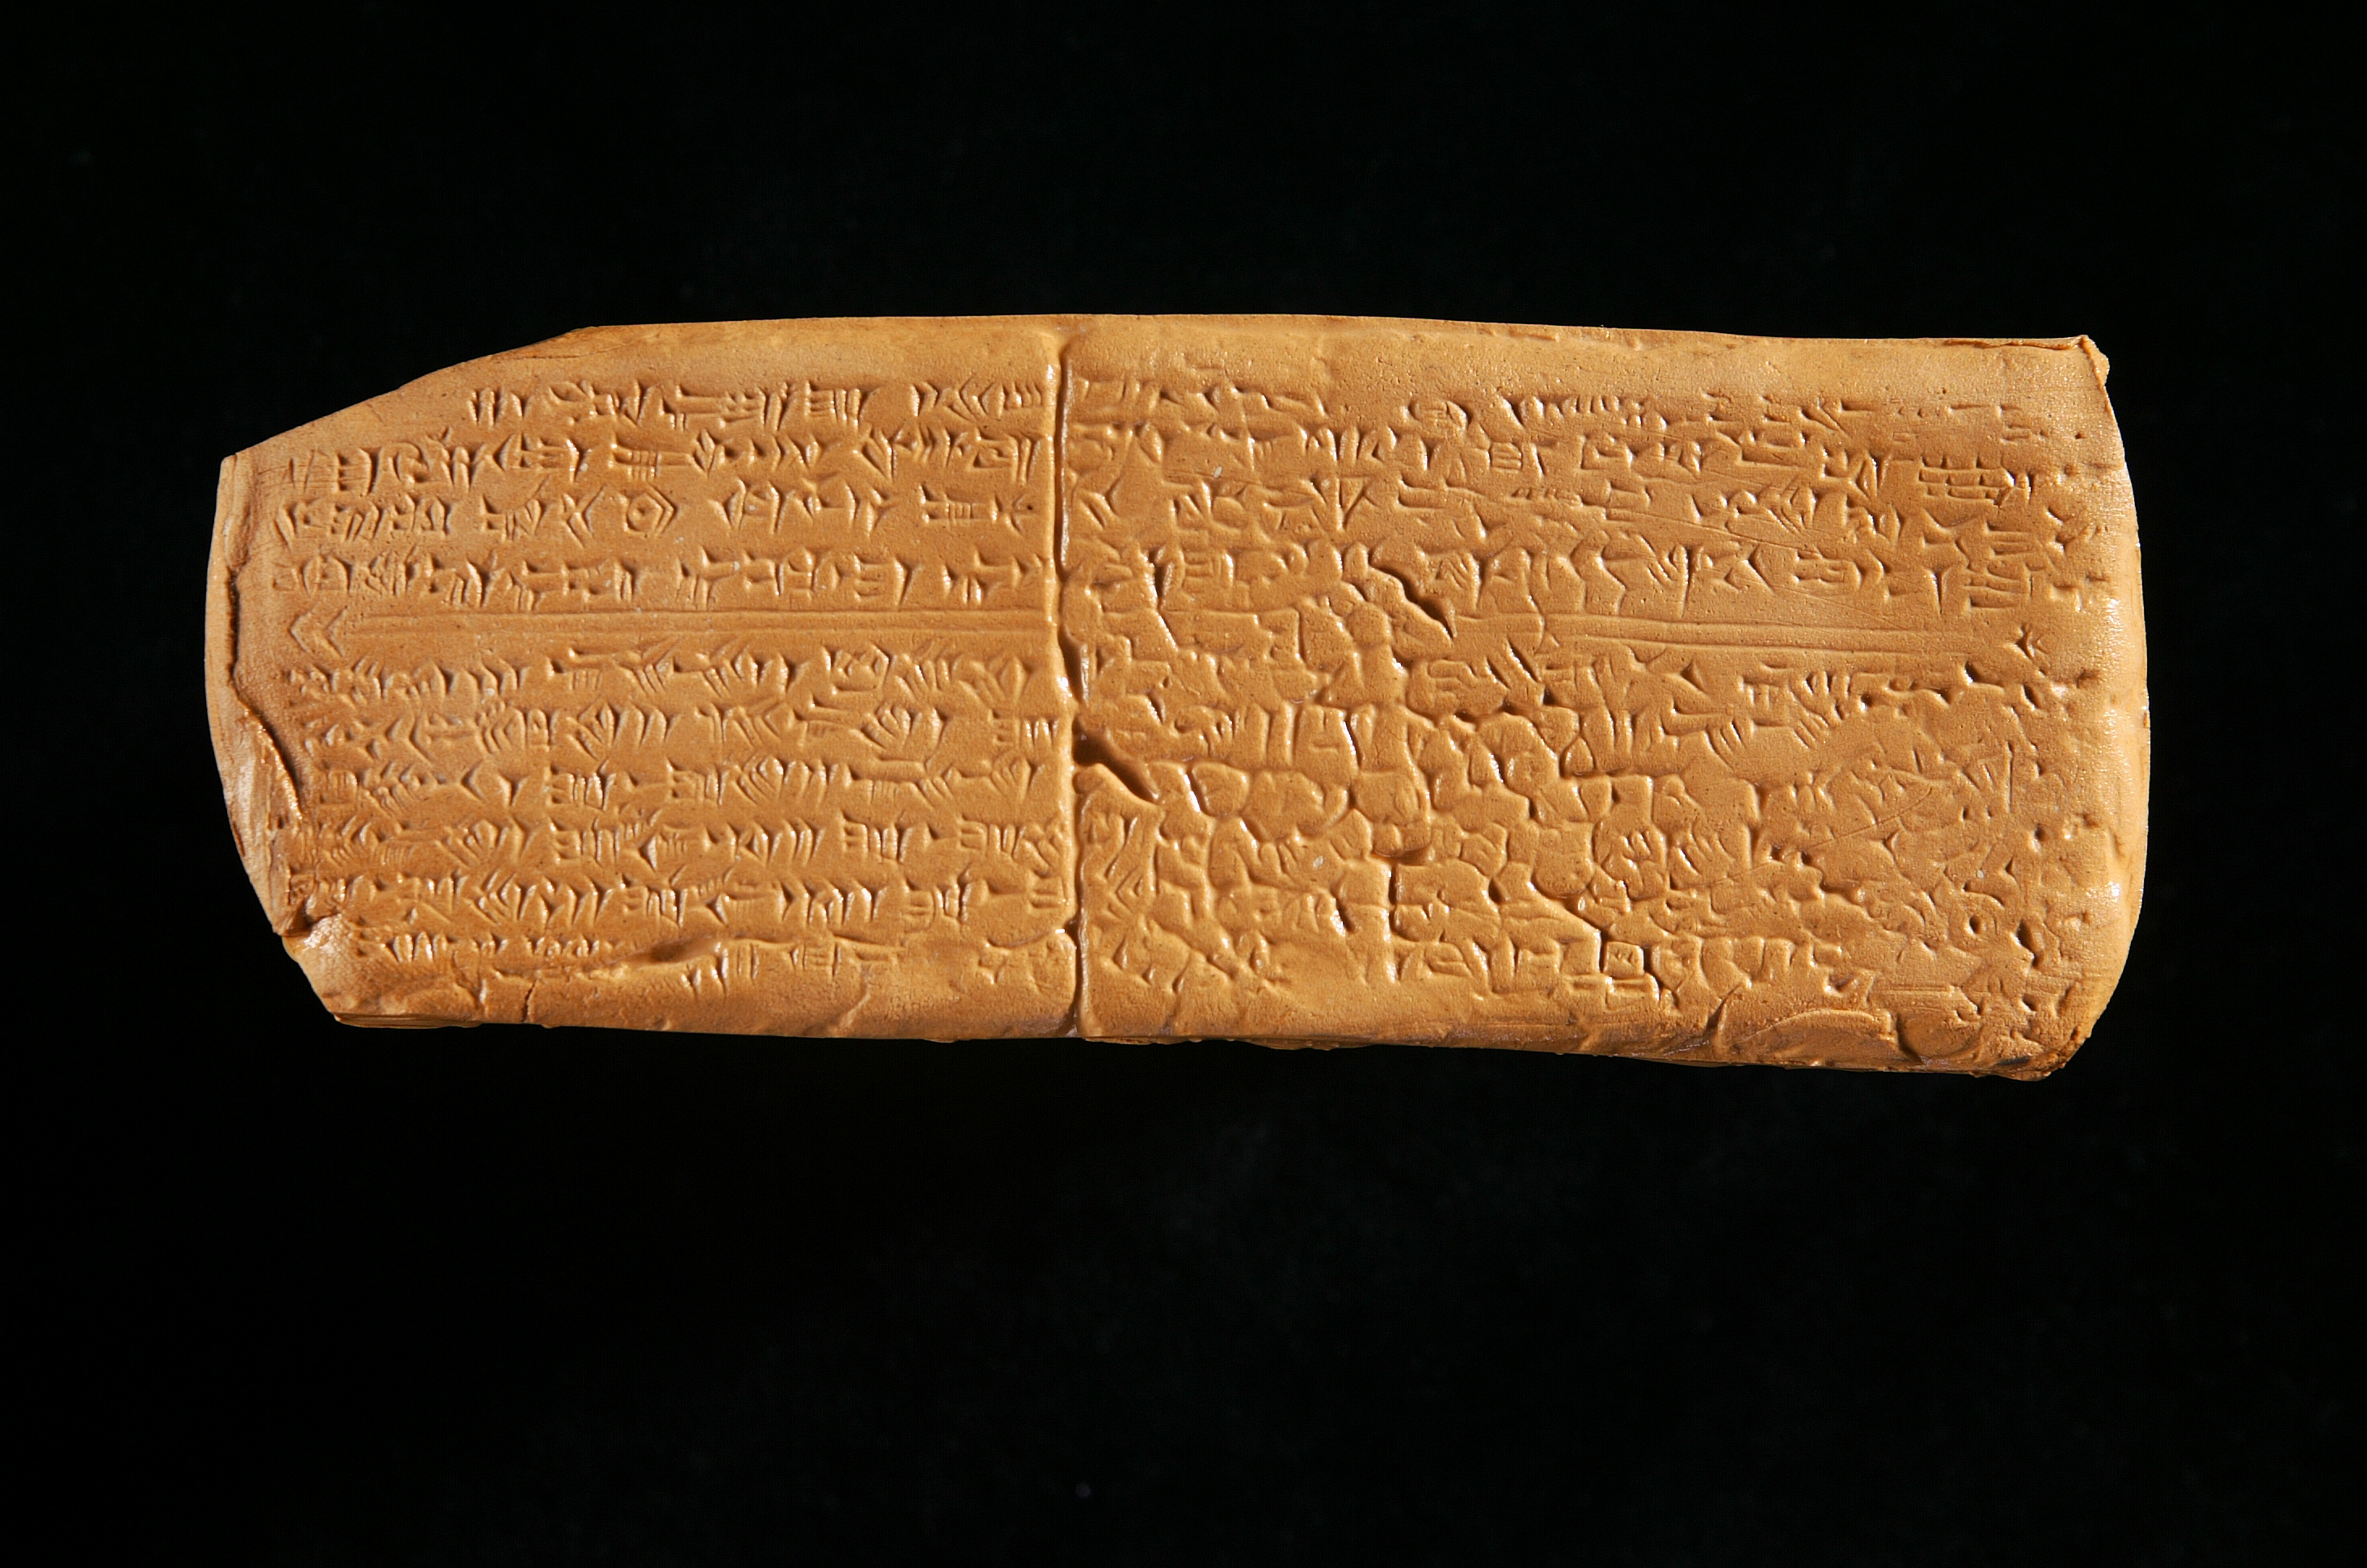 musical-score-from-ugarit-clay-tablet-from-ugarit-with-the-hurrian-hymn-13th-cent-bc-1472635579